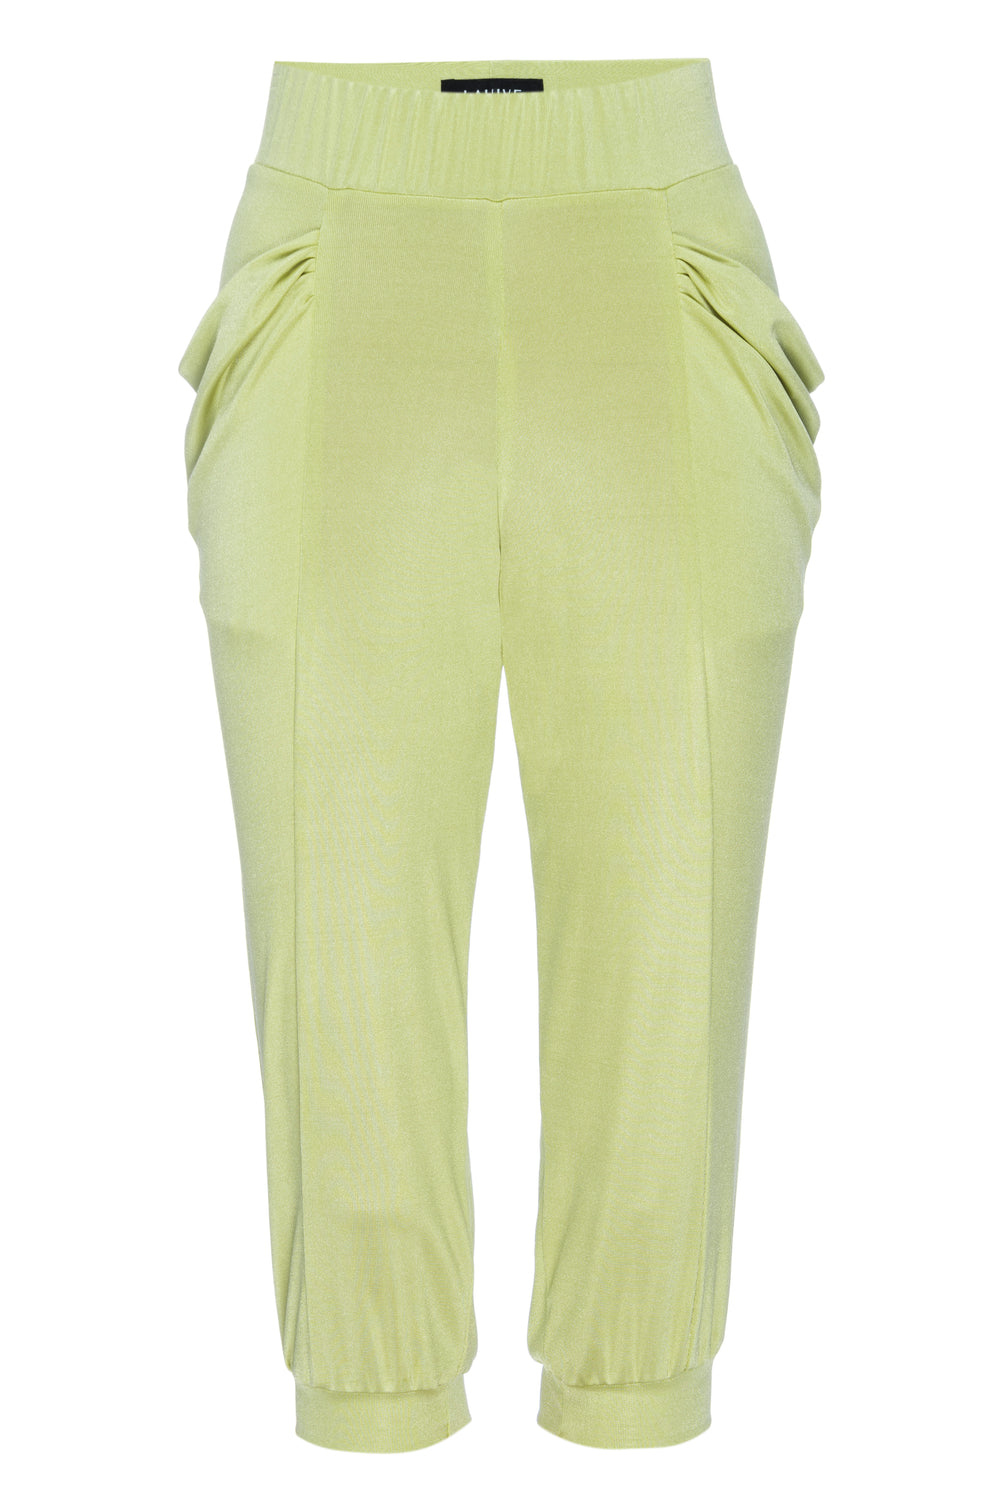 Yellow lounge pant with relaxed fit pockets.